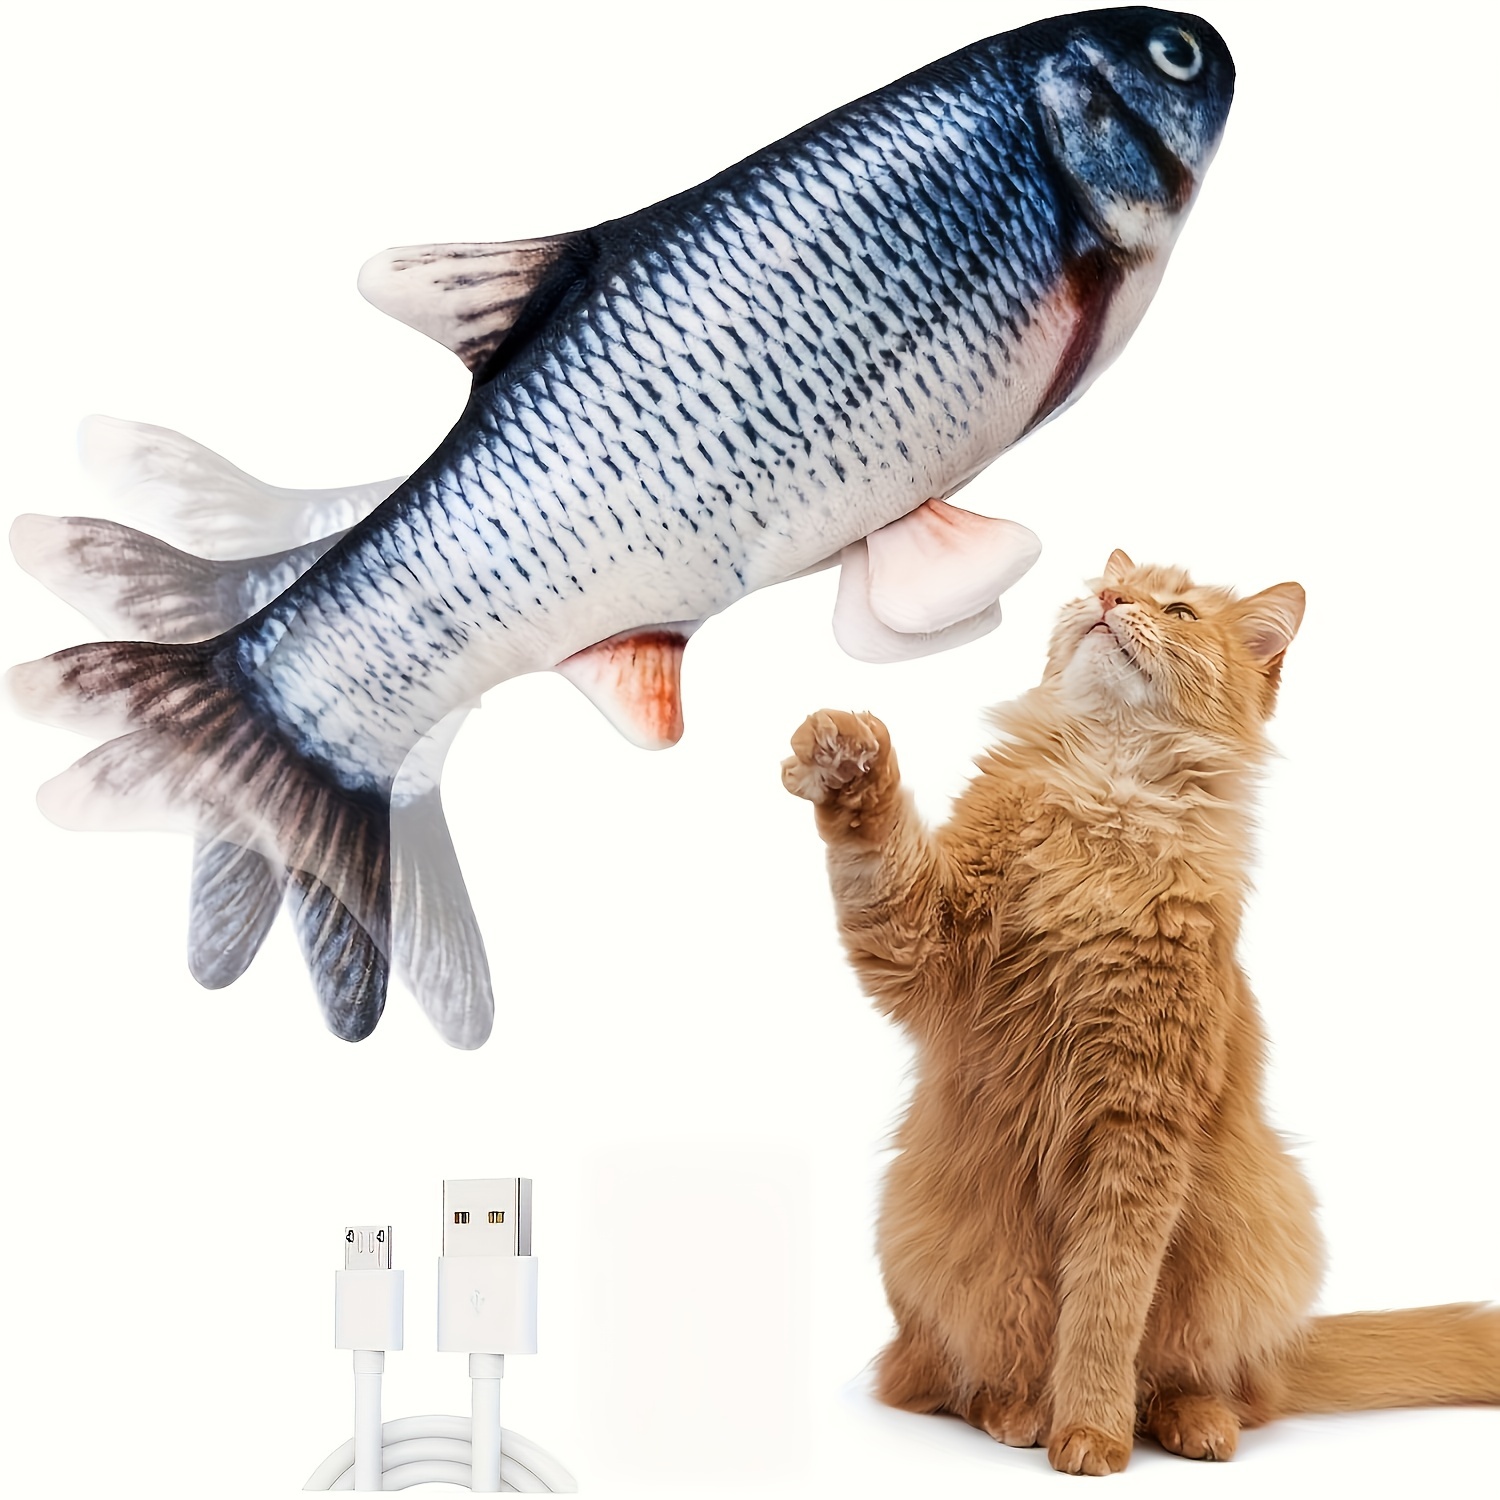 Pet Fish Toys Electric Cat Fish Mint Jumping Fish Rechargeable pet toys